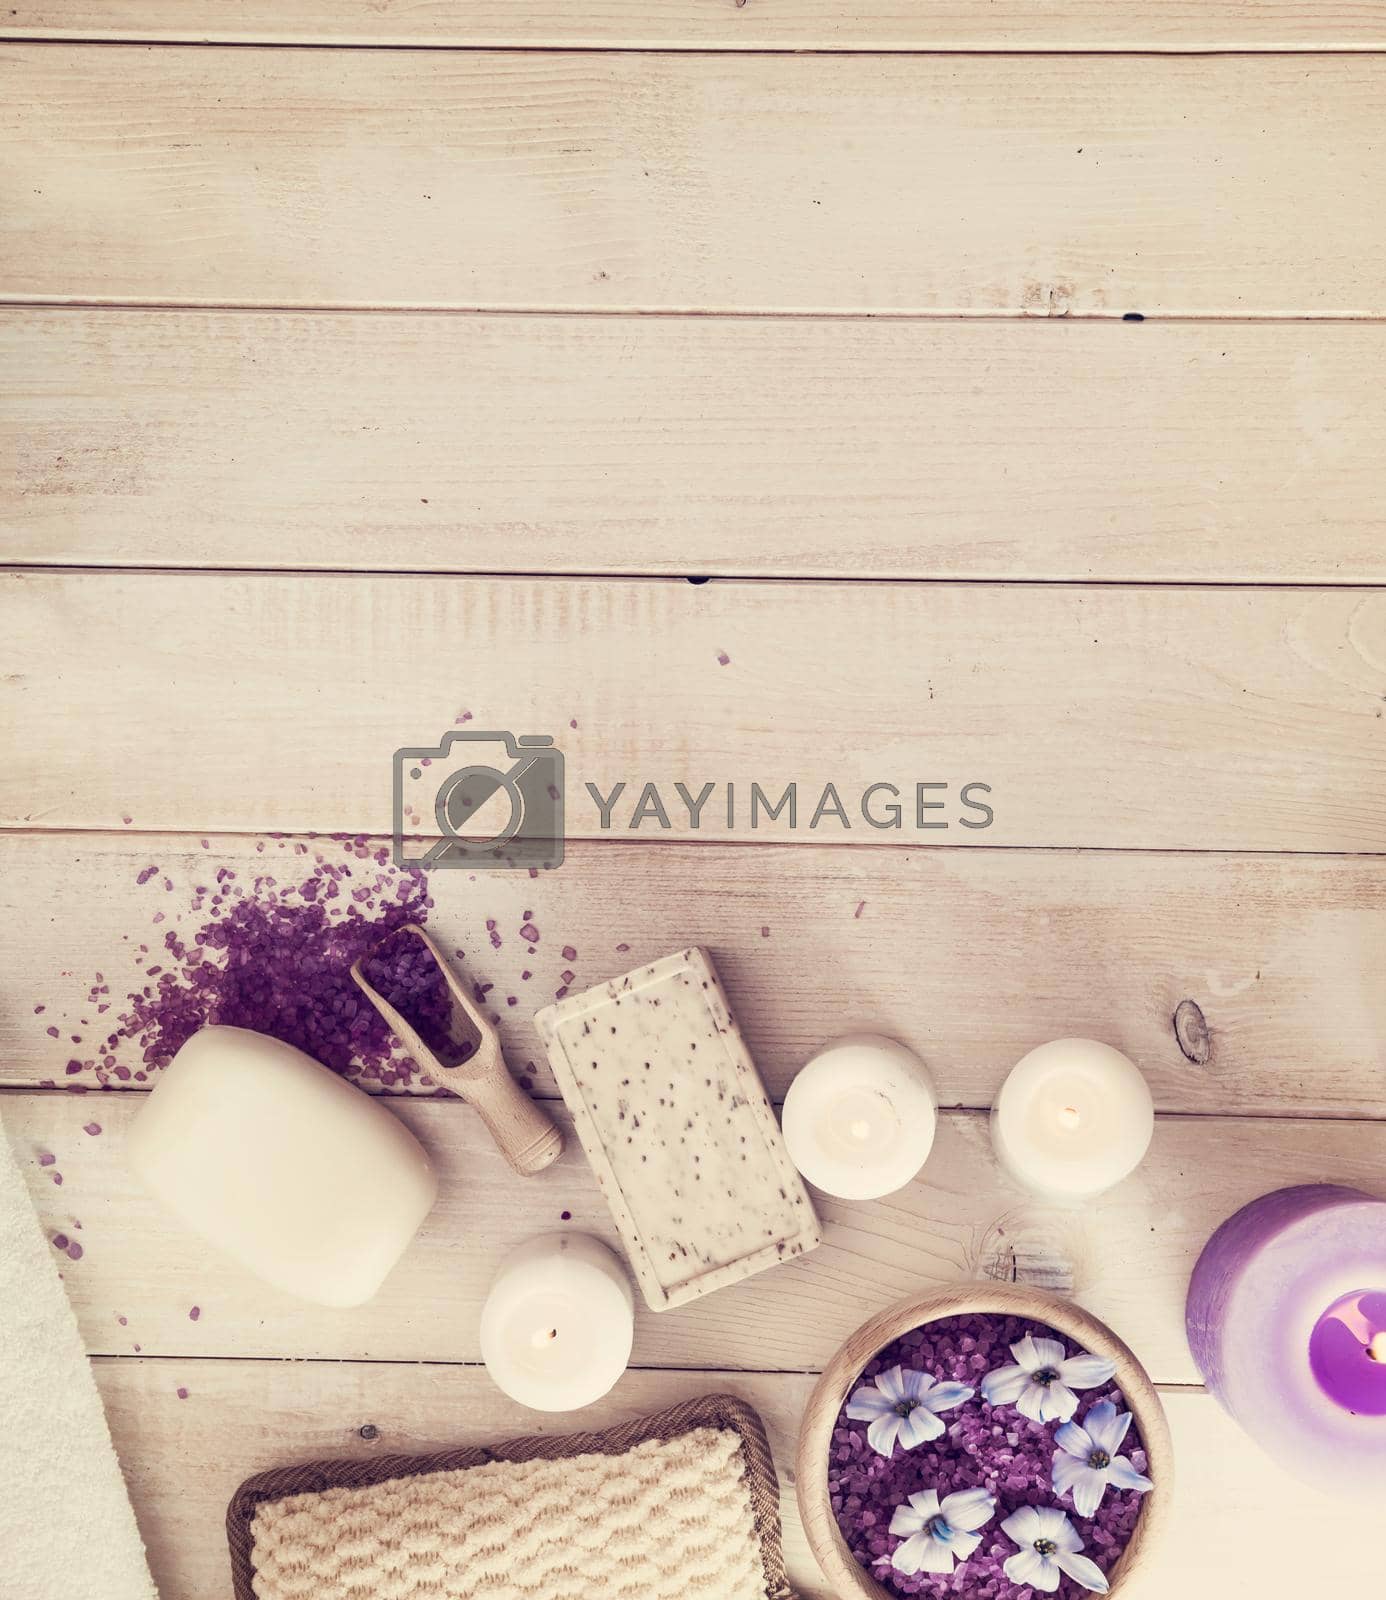 Composition of spa treatment on the white wooden table